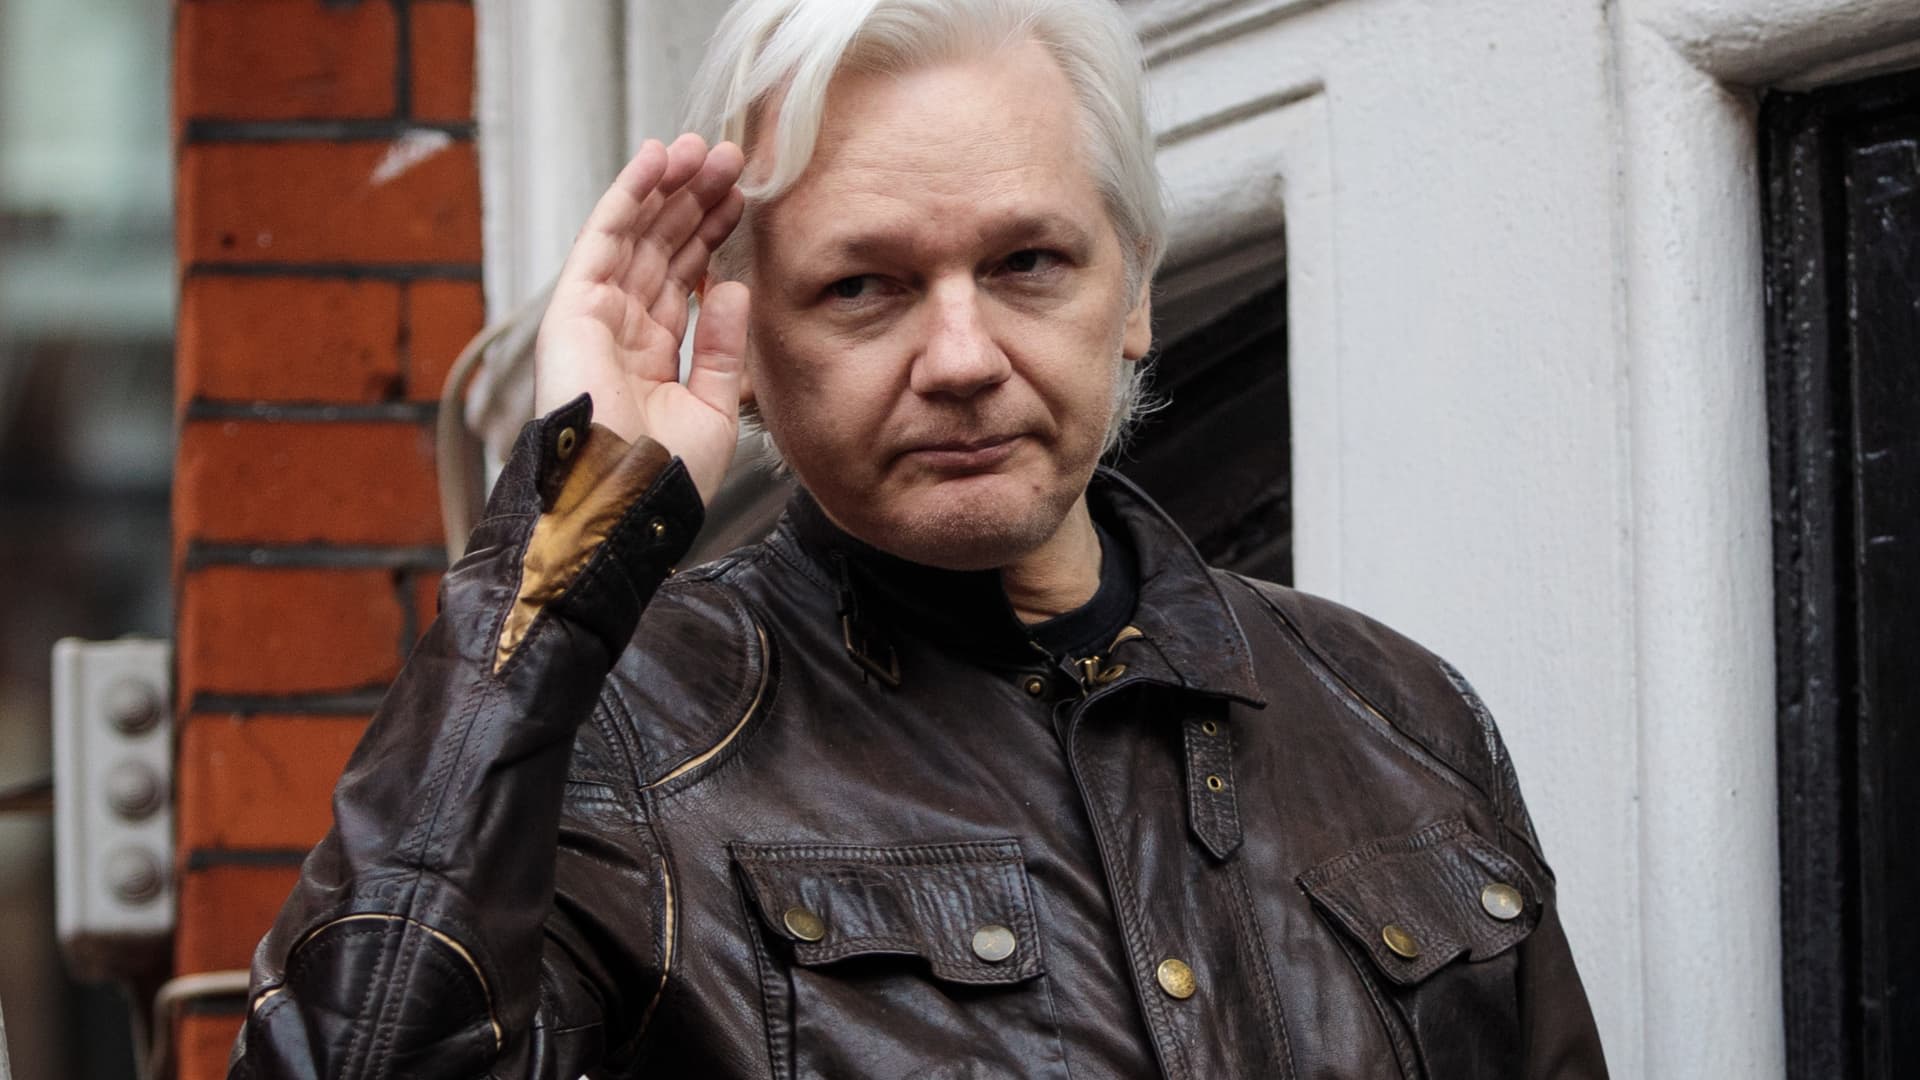 WikiLeaks founder Julian Assange can appeal extradition to U.S., UK court rules